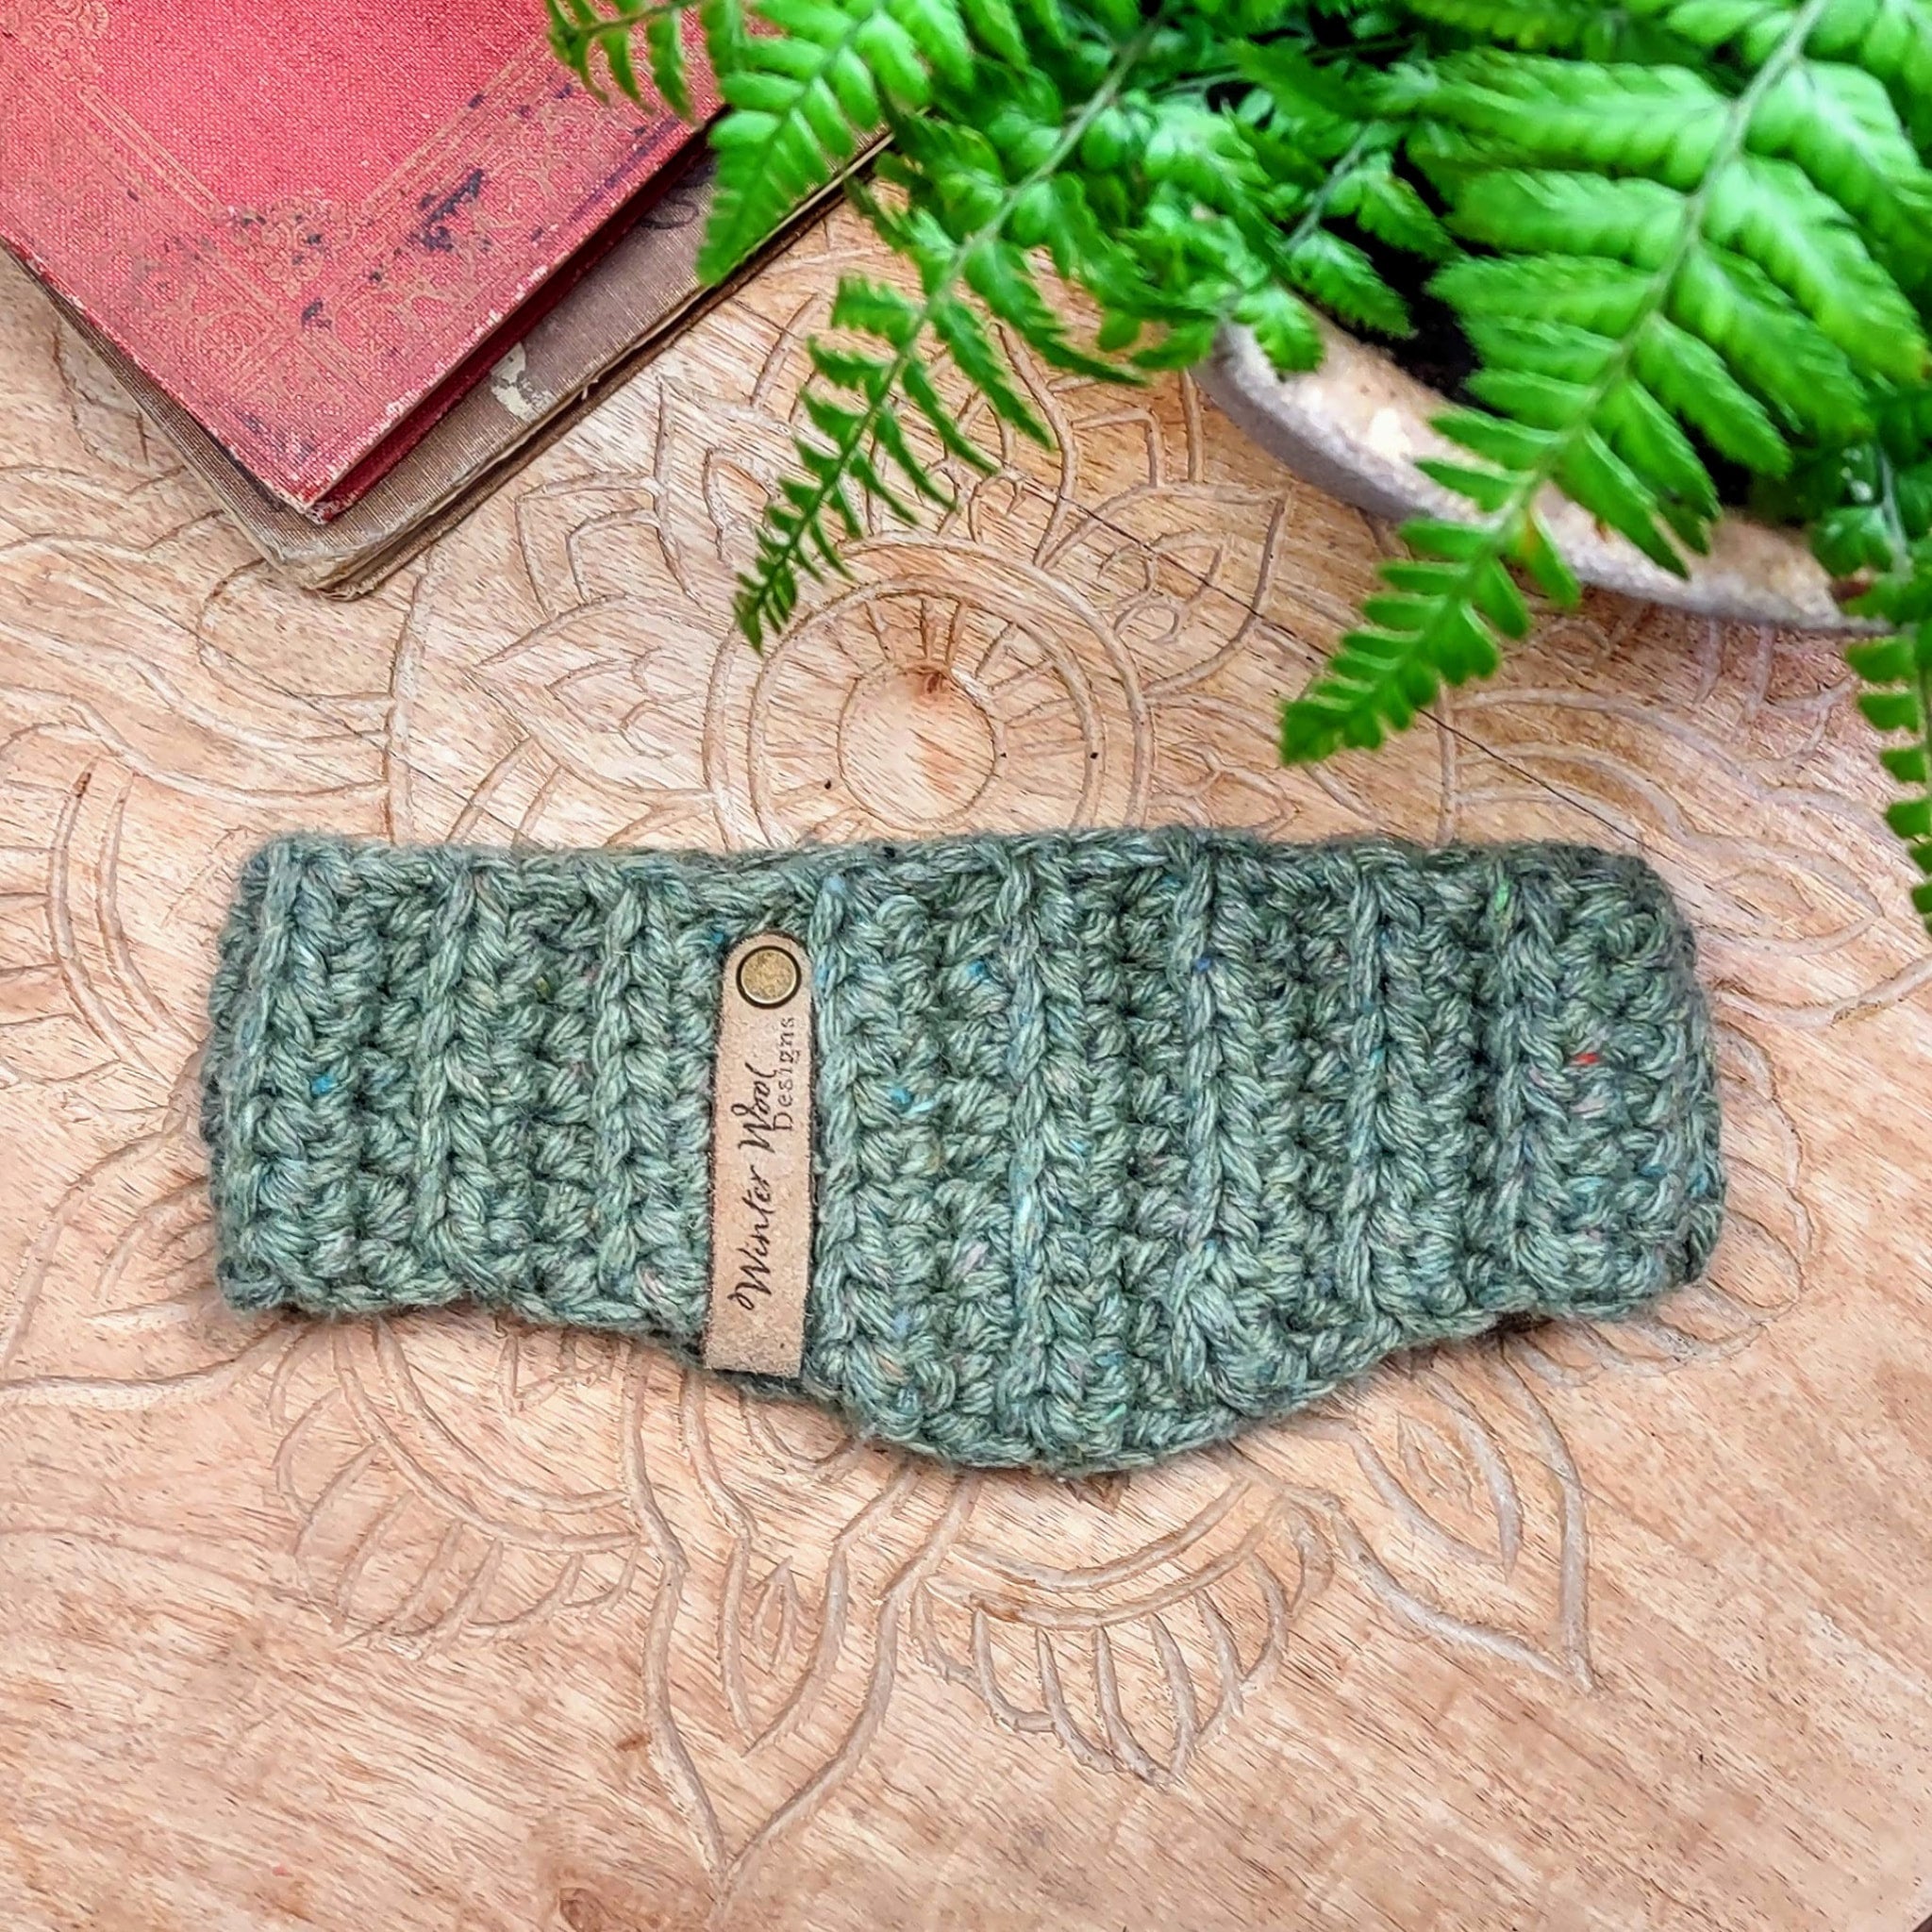 Gender Neutral handmade with recycled tweed wool headband earwarmer with  added stitches to keep ears covered. | Winter Wool Designs